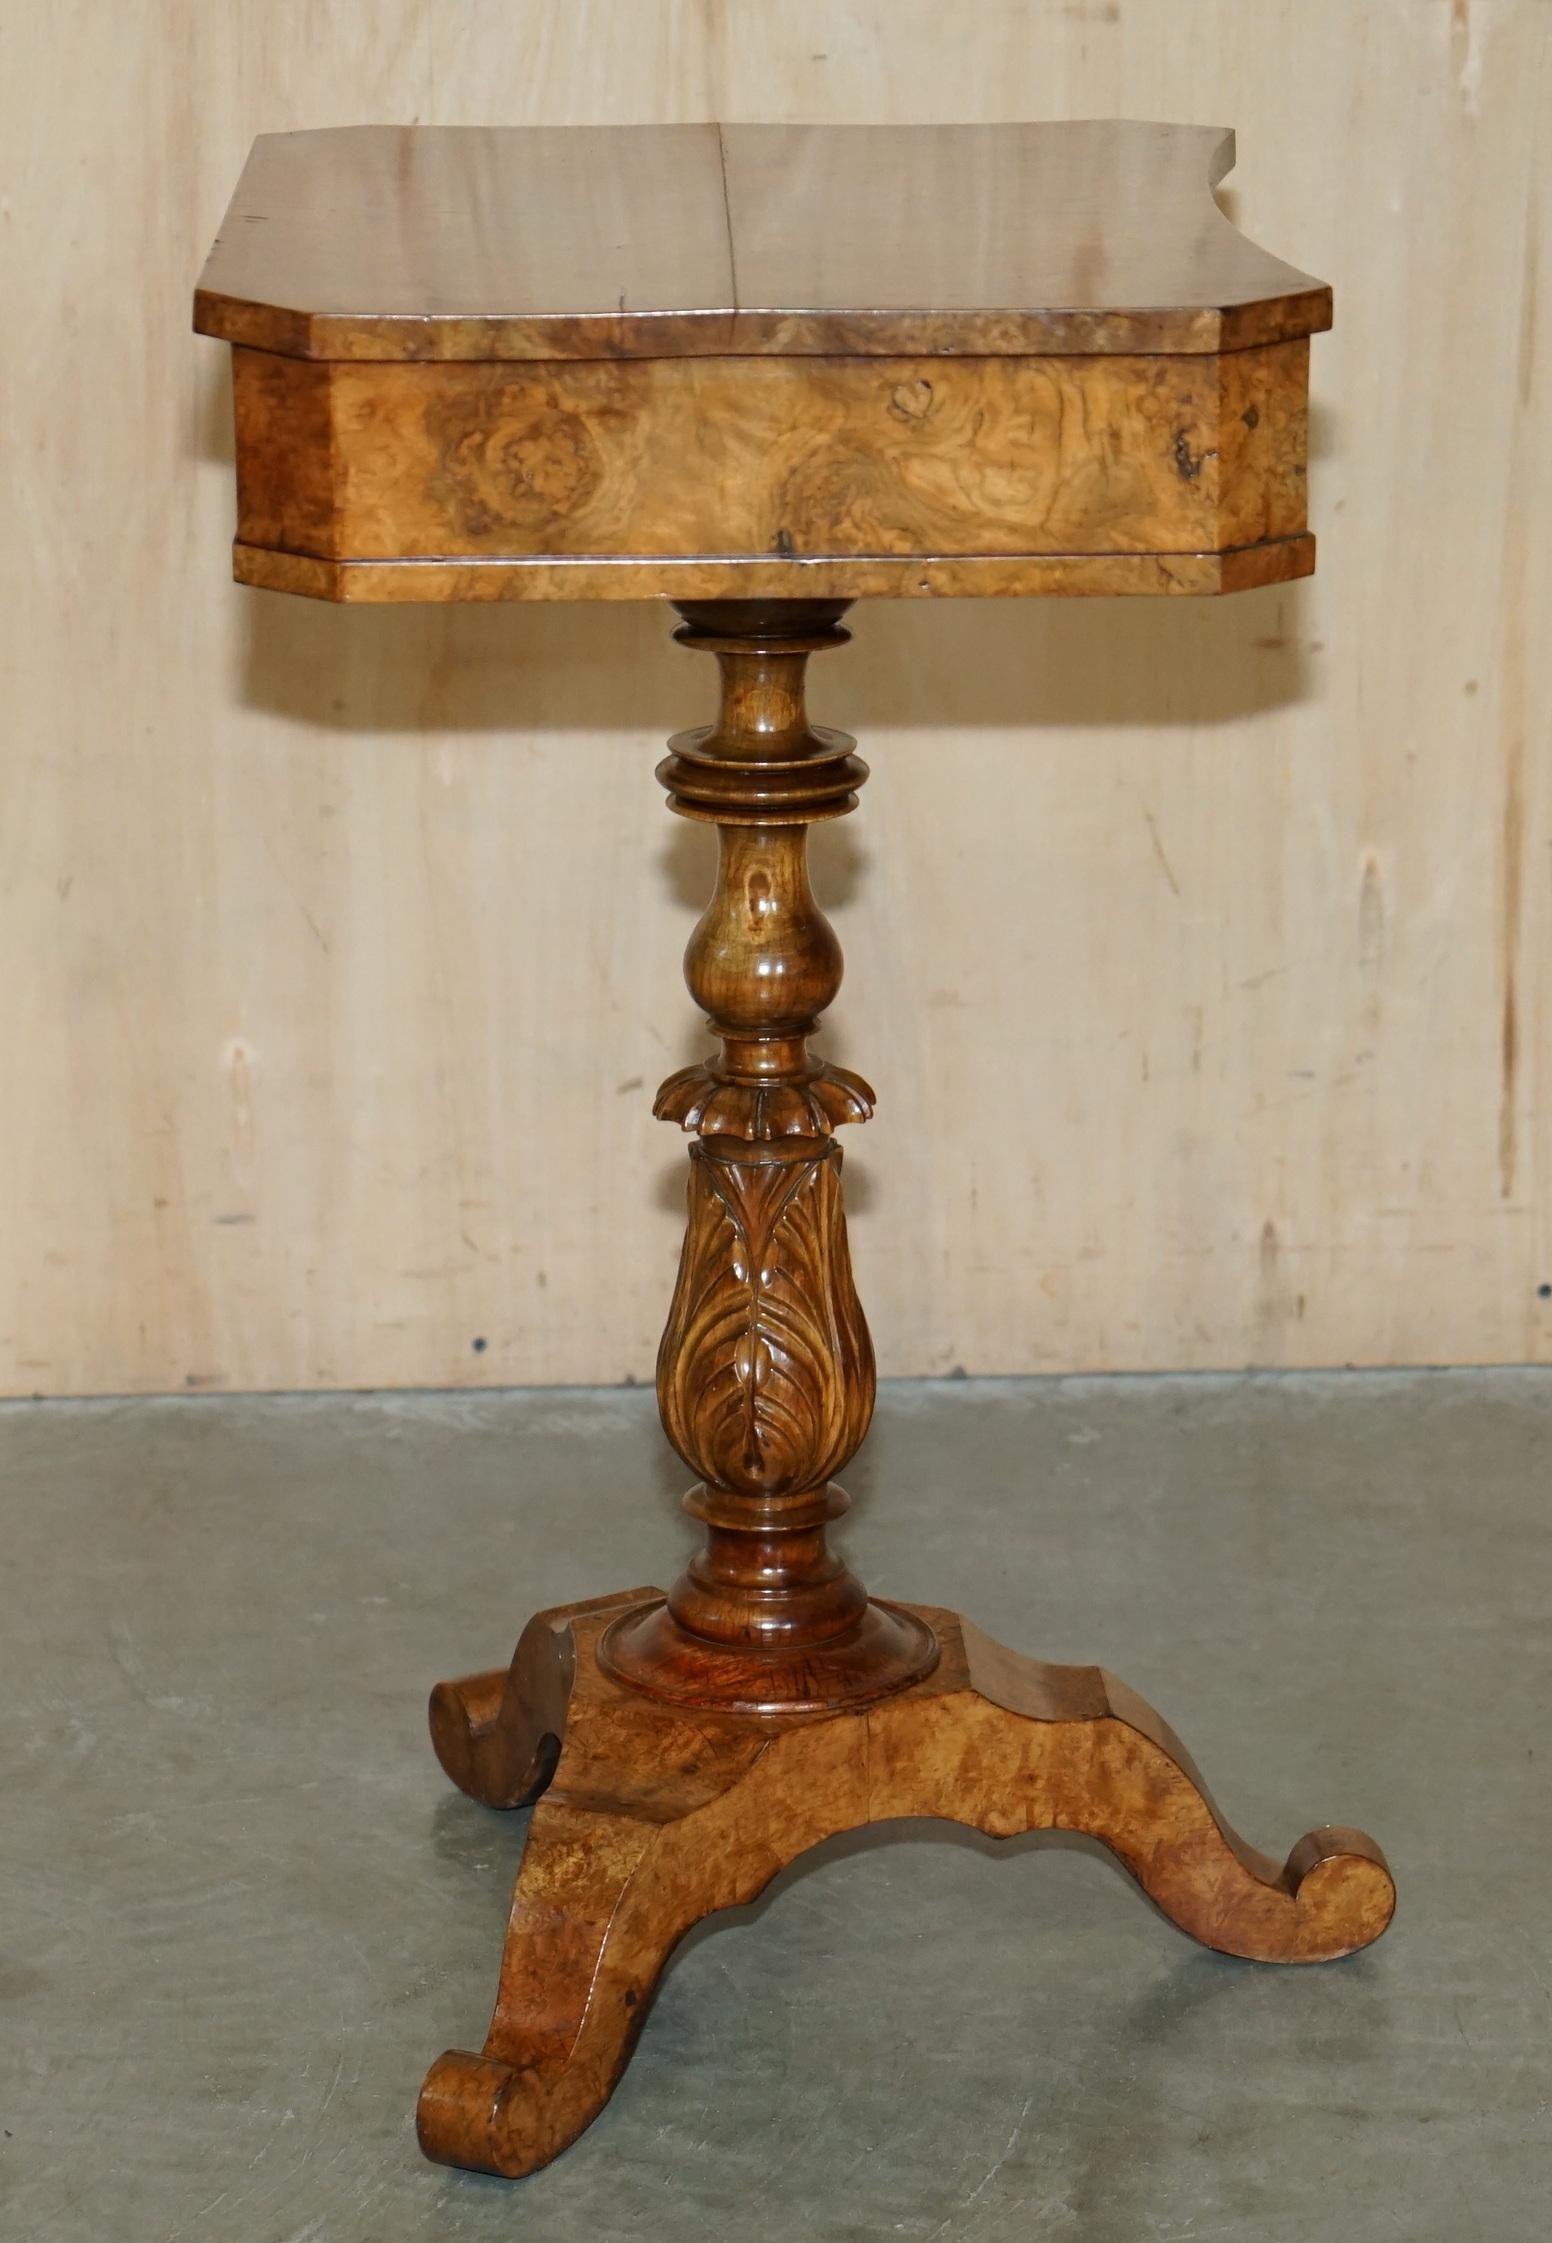 EXQUISITE QUALITY WILLIAM IV CIRCA 1830 BURR WALNUT SiDE END WORK SEWING TABLE For Sale 9